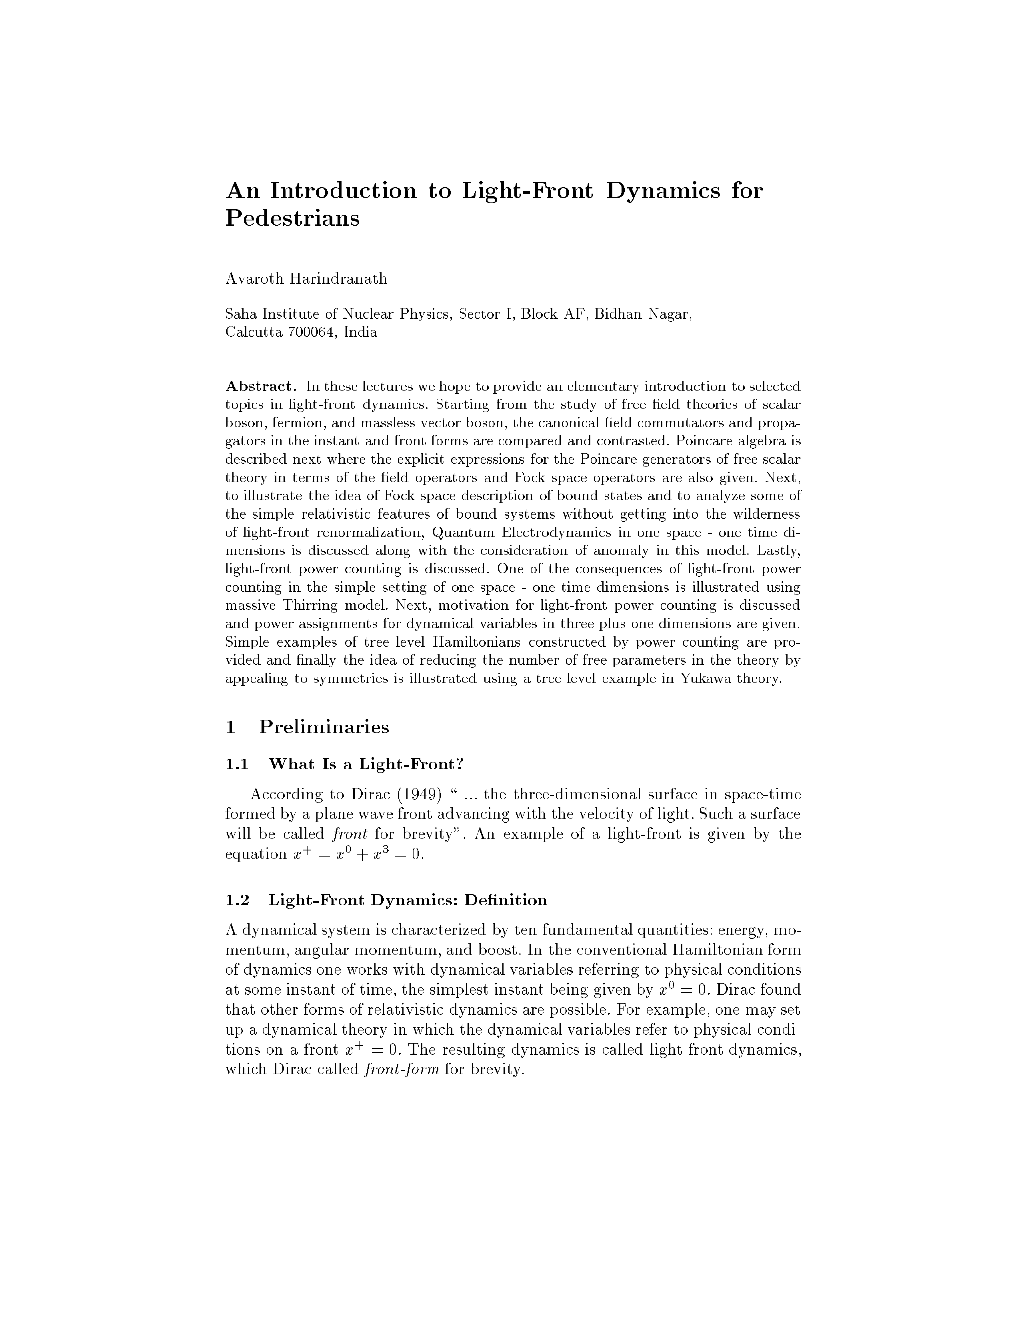 An Introduction to Light-Front Dynamics for Pedestrians